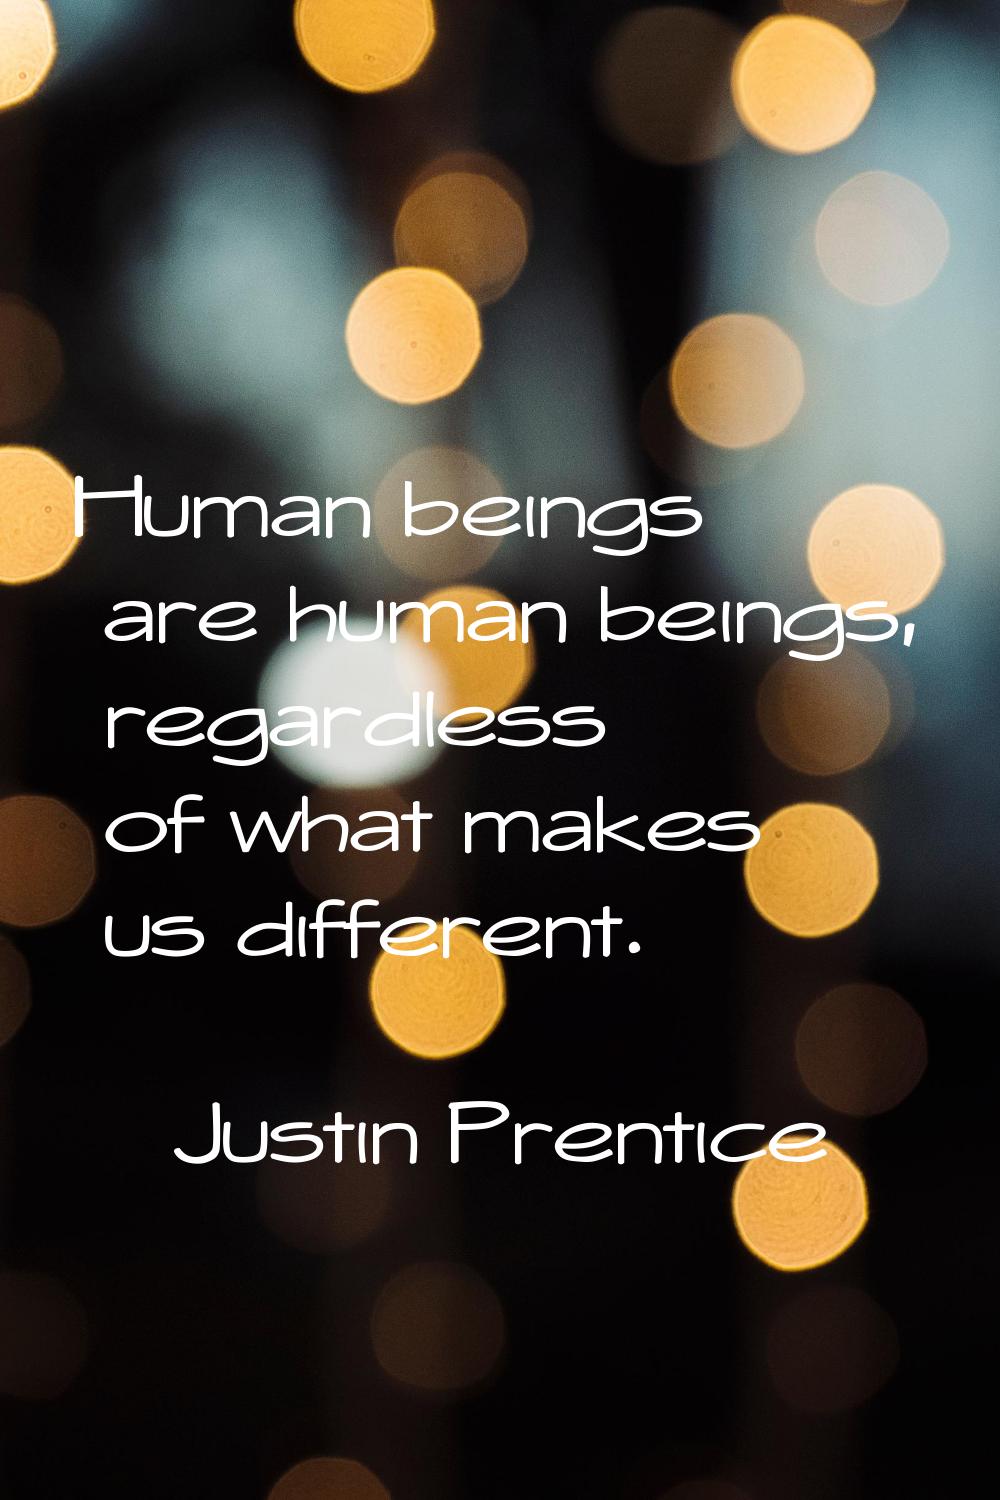 Human beings are human beings, regardless of what makes us different.